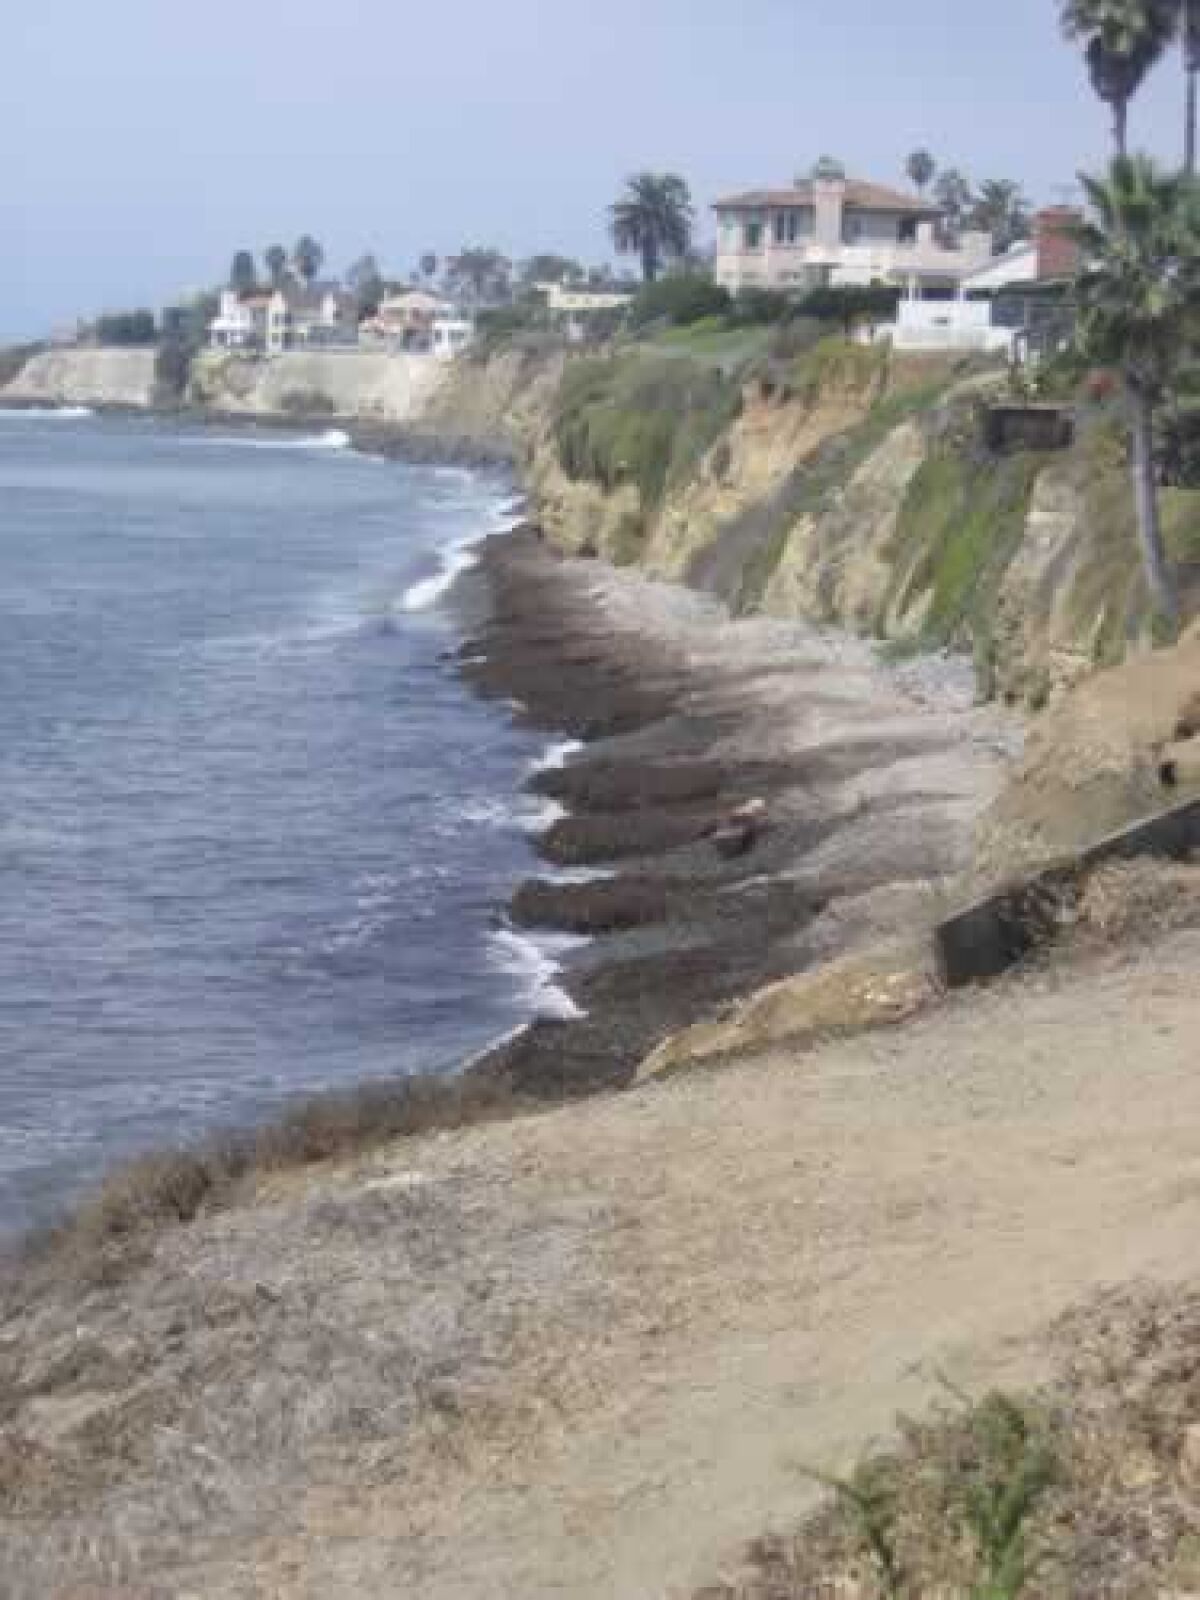 A view of the shoreline at Calumet Park in Bird Rock, near where a surfer was rescued June 21.